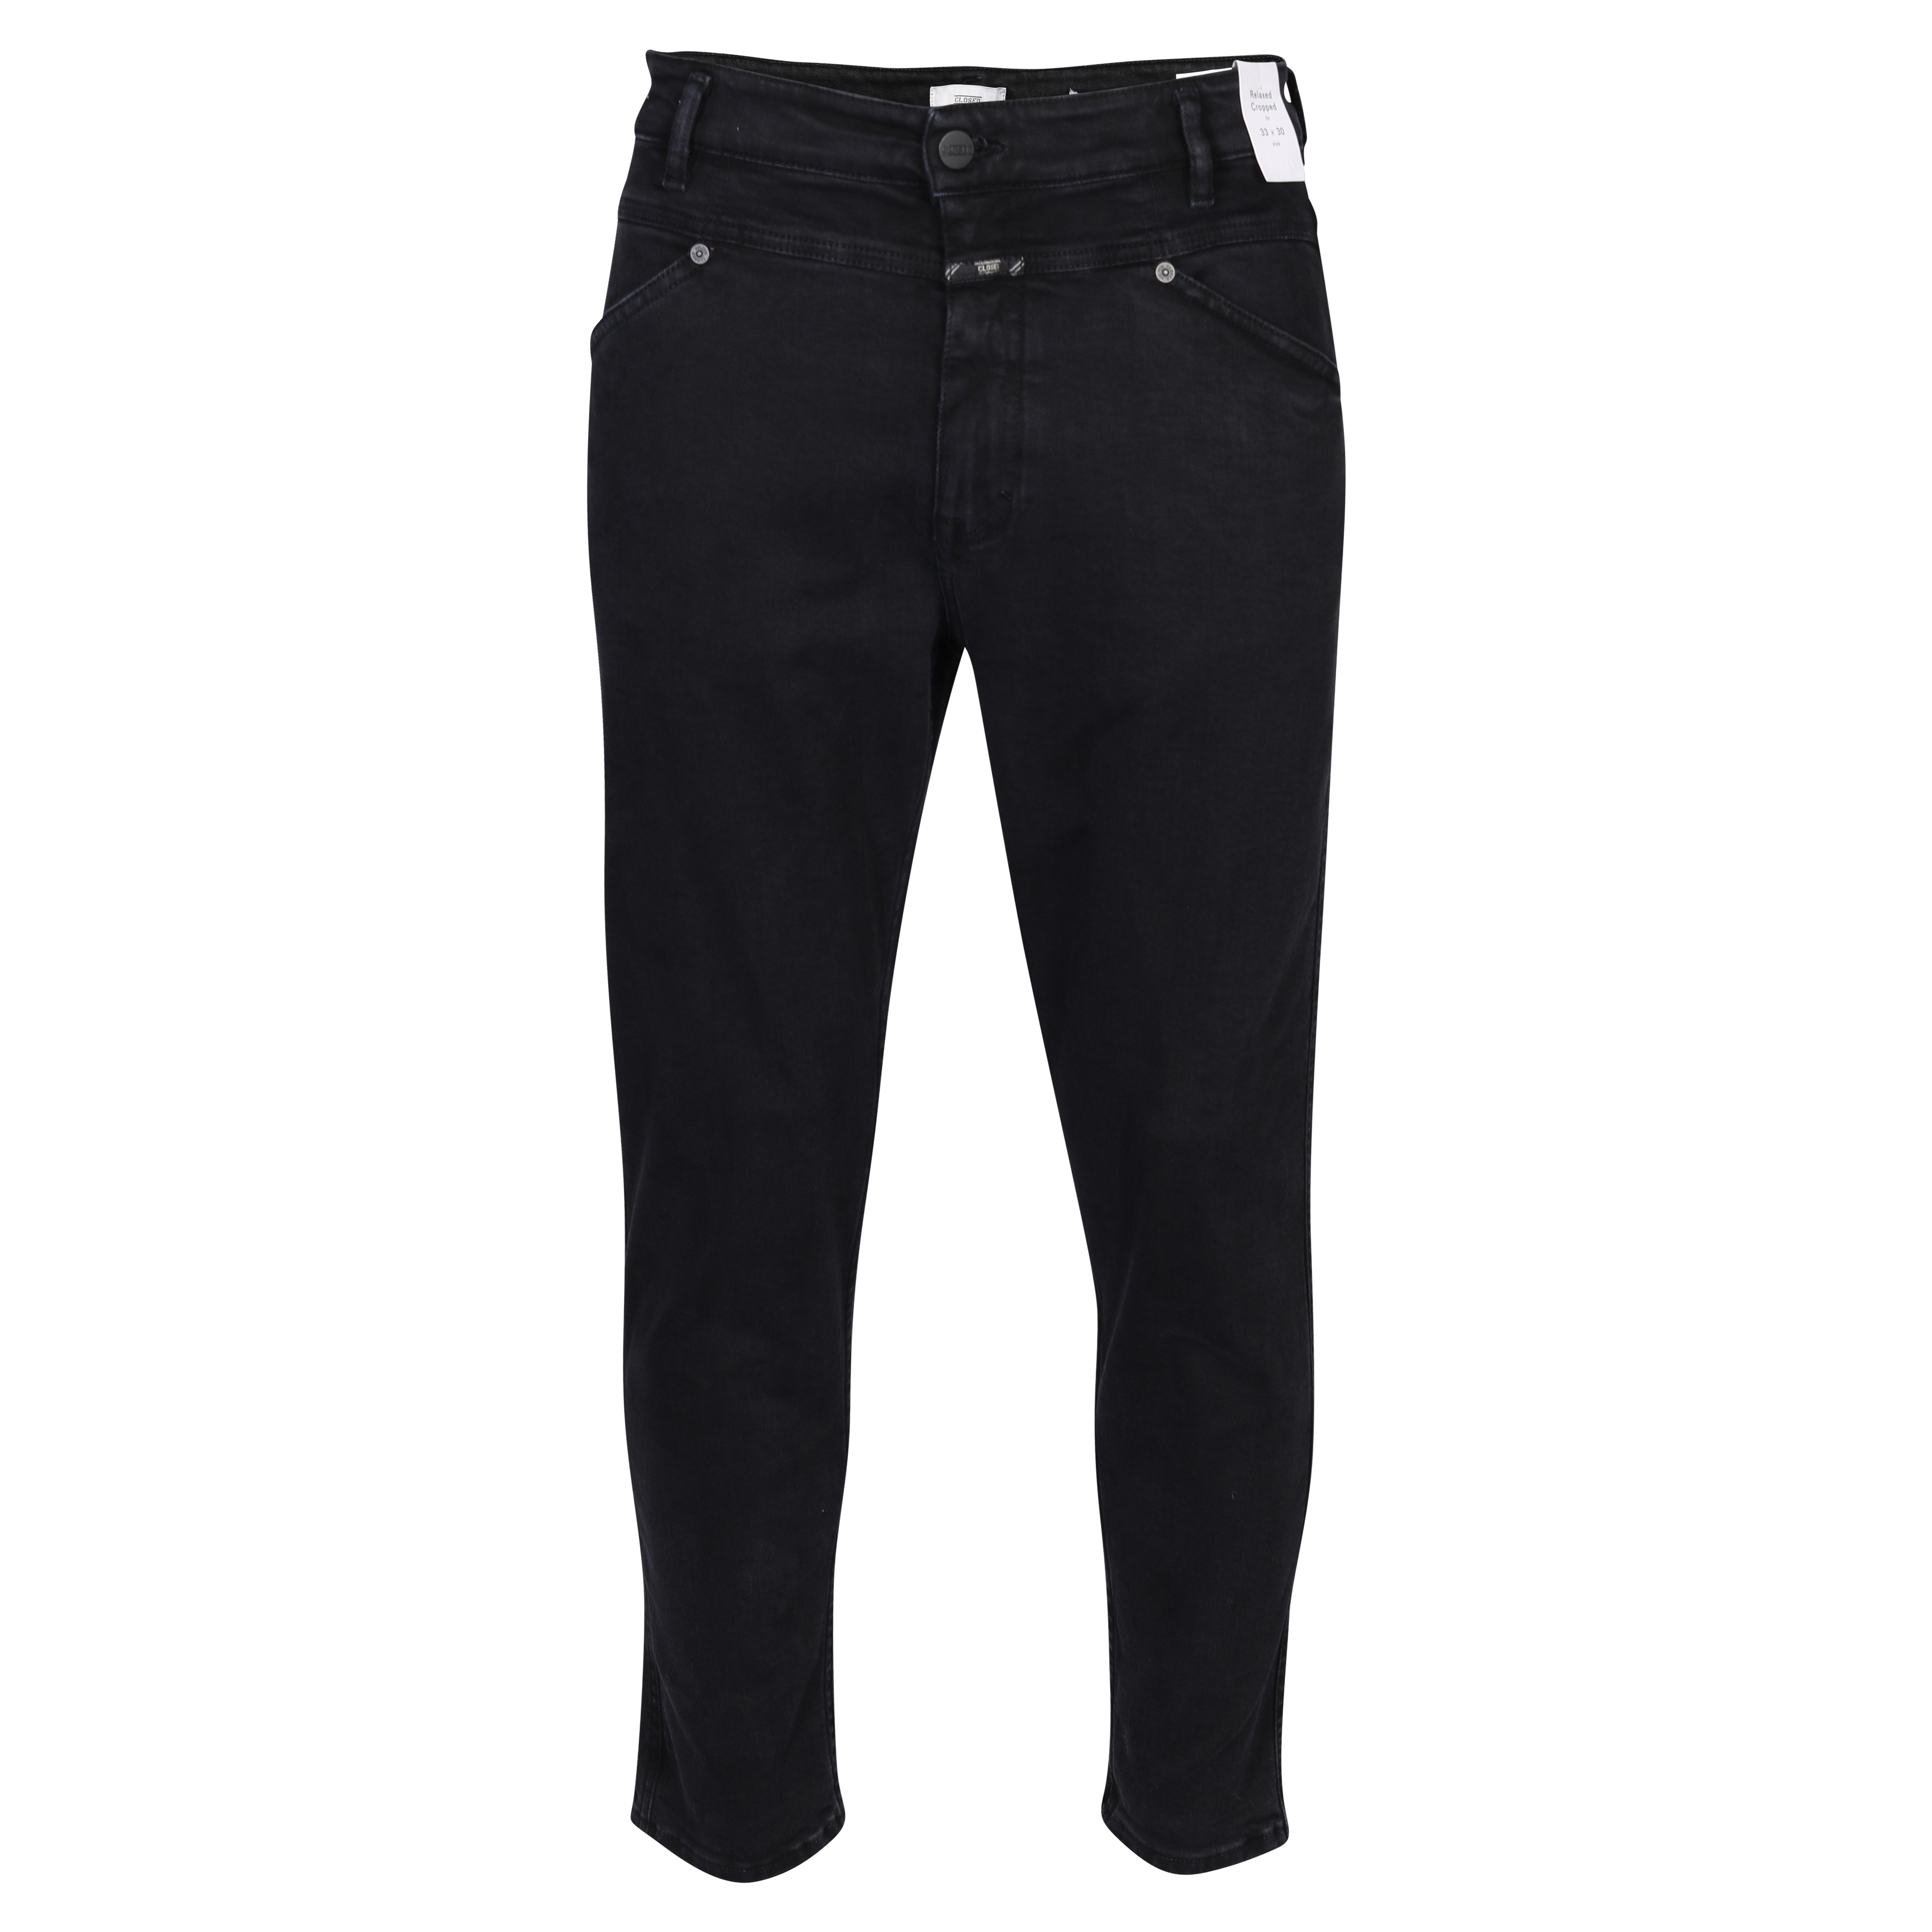 CLOSED X-Lent Tapered Jeans in Black 36